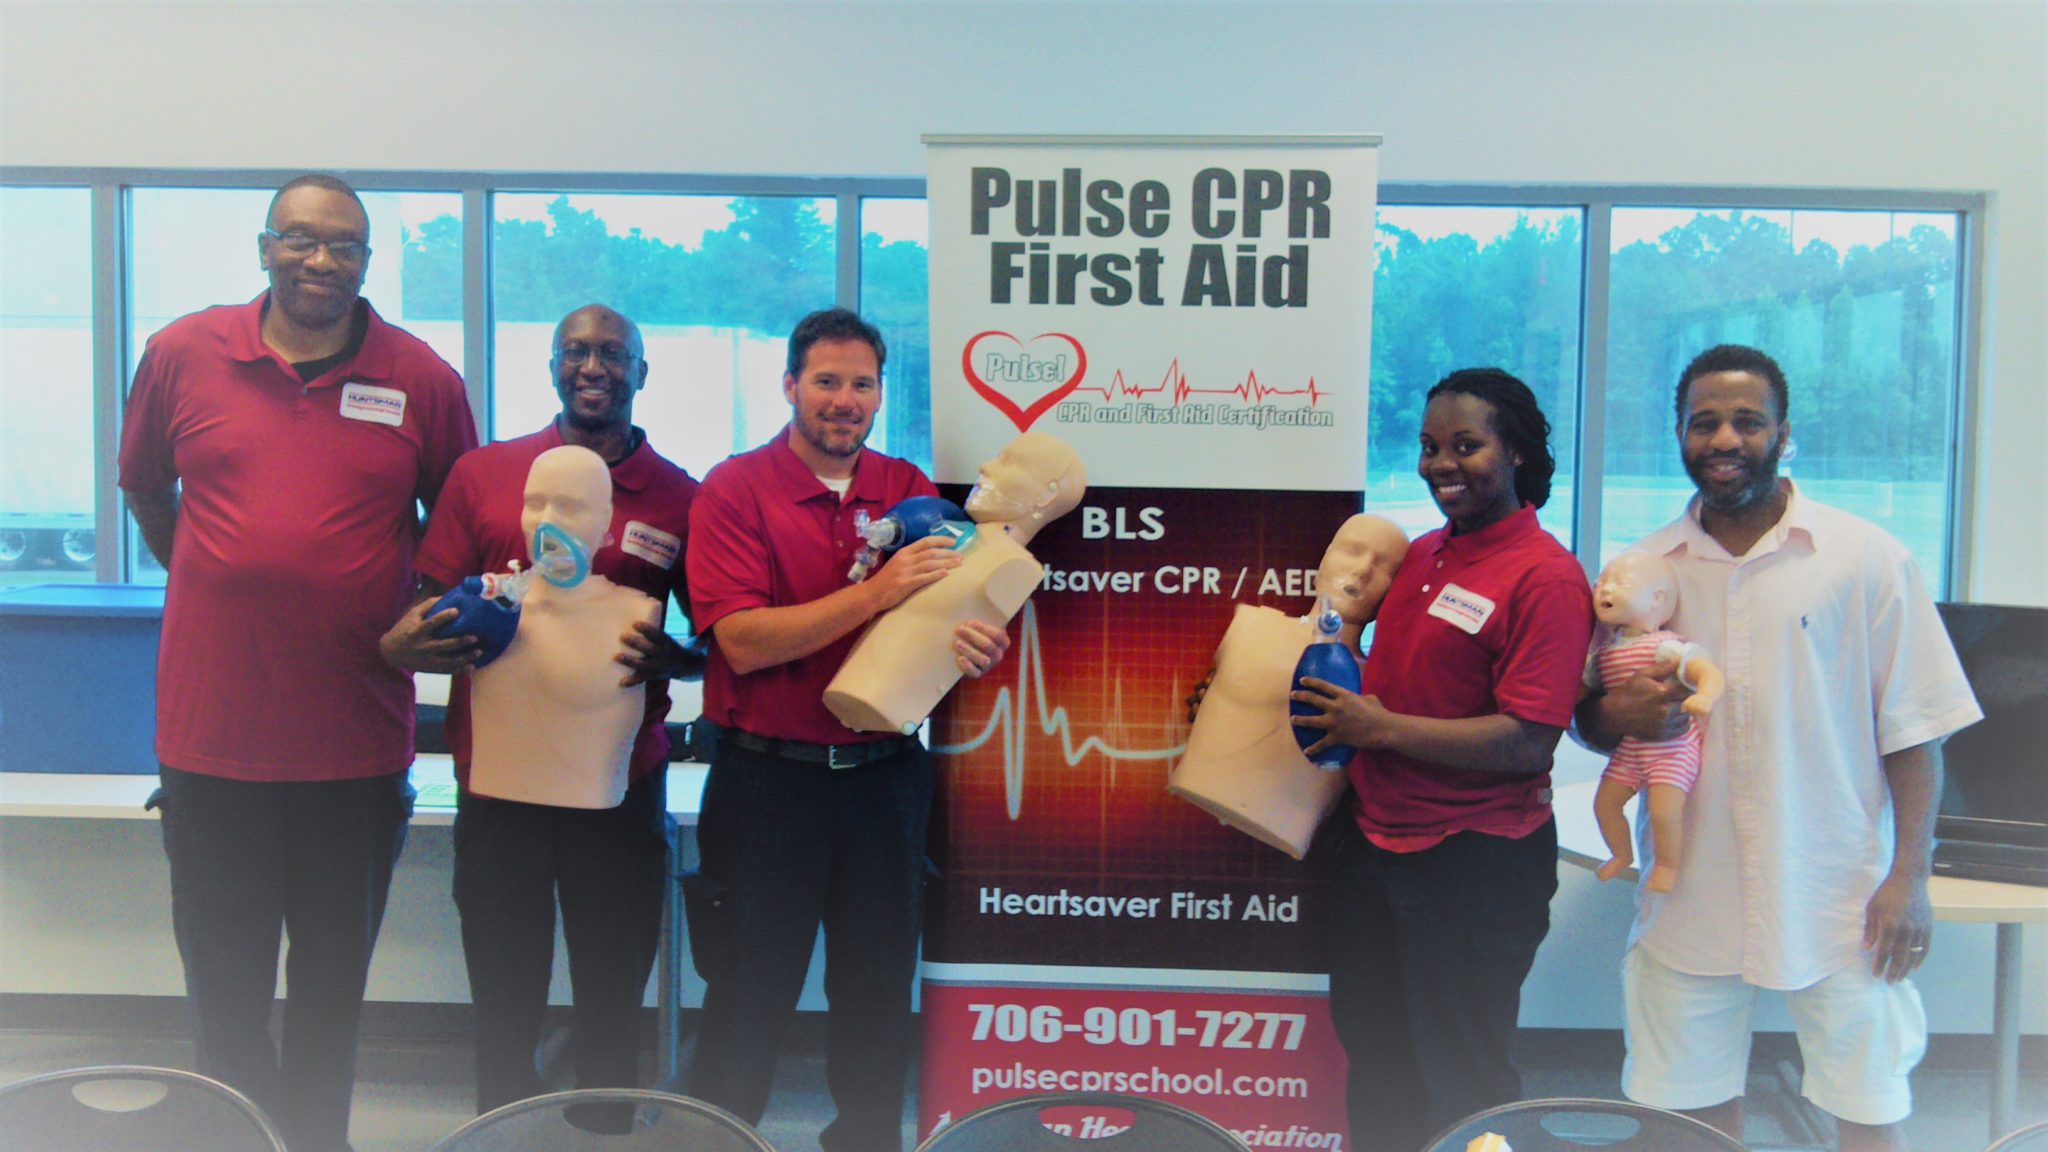   Corporate CPR Training and Why Is It So Important?